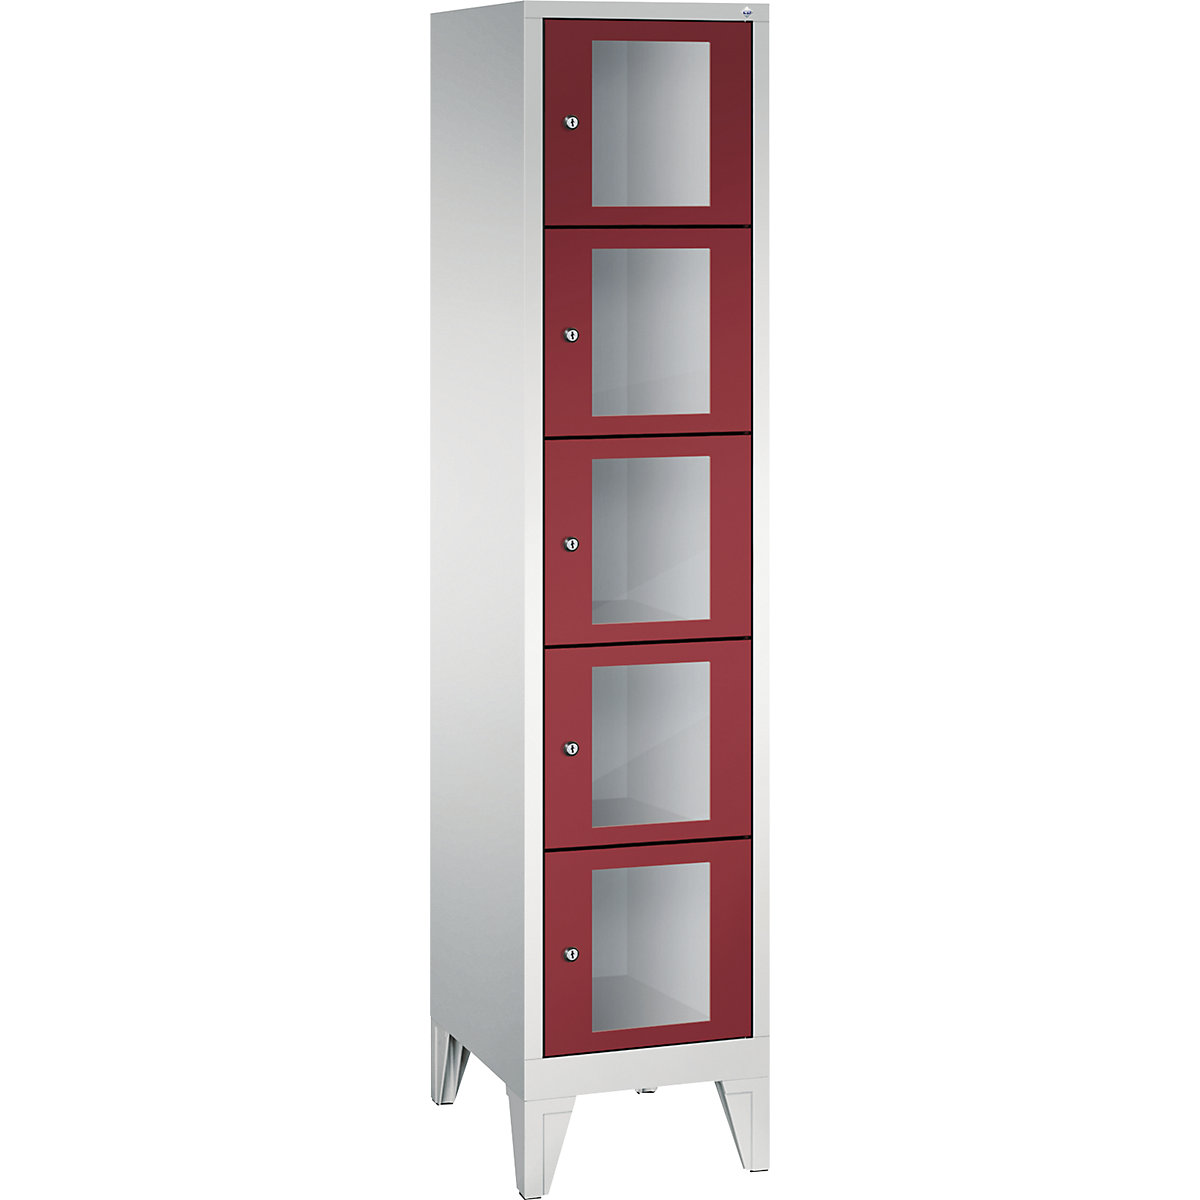 C+P – CLASSIC locker unit, compartment height 295 mm, with feet, 5 compartments, width 420 mm, ruby red door